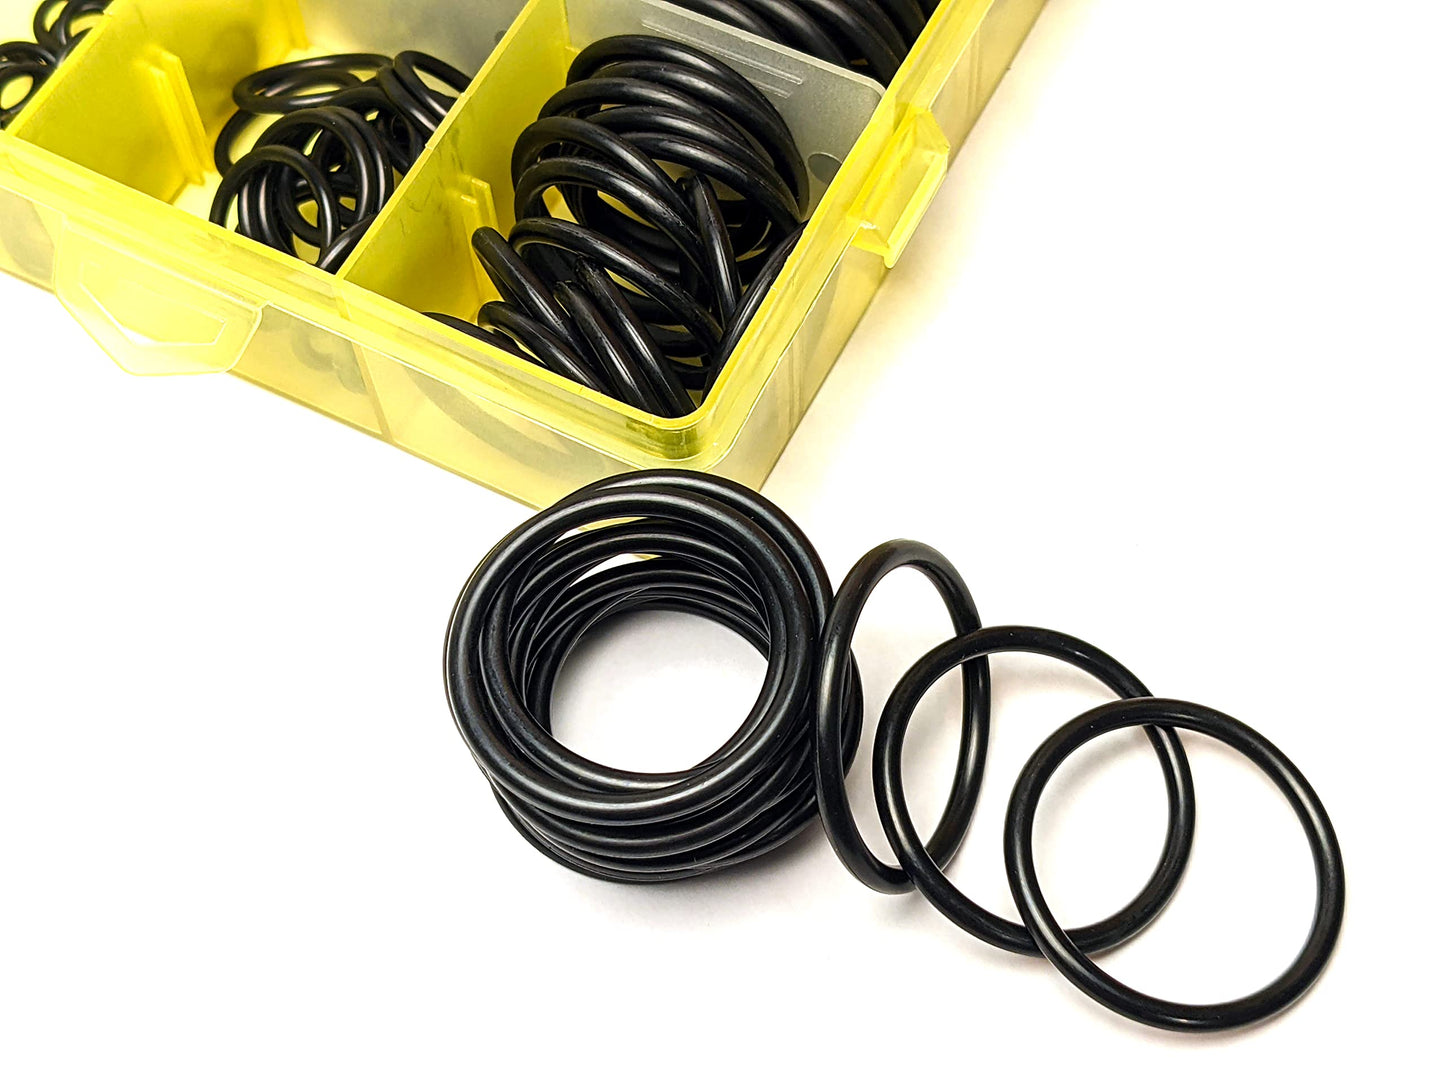 Hydraulic O-Ring Kit FACE ORFS Fittings 155 Pieces (8 Common Sizes) SAE Buna-N 90 Durometer